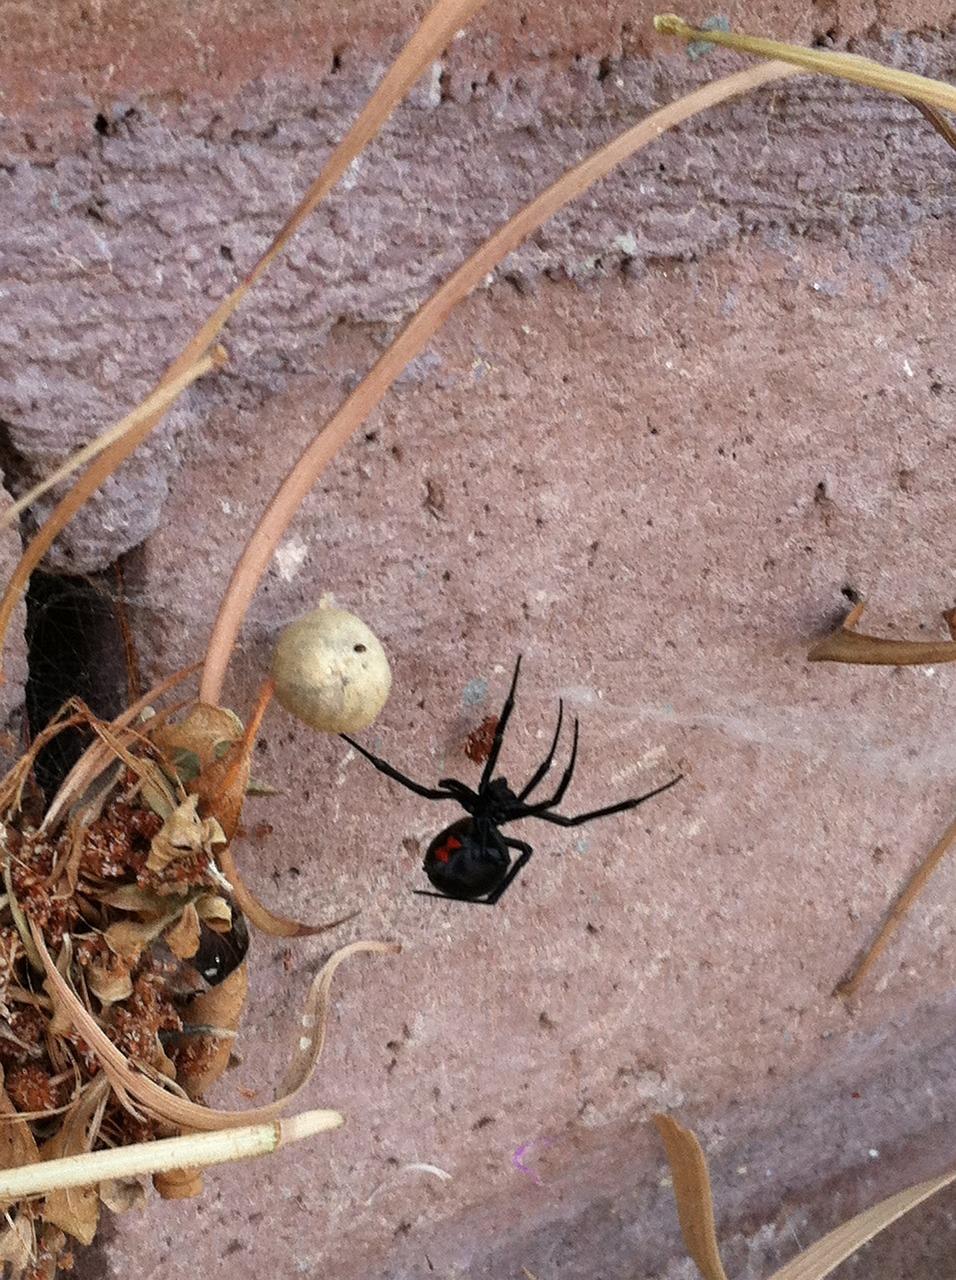 What kills black widows instantly? 